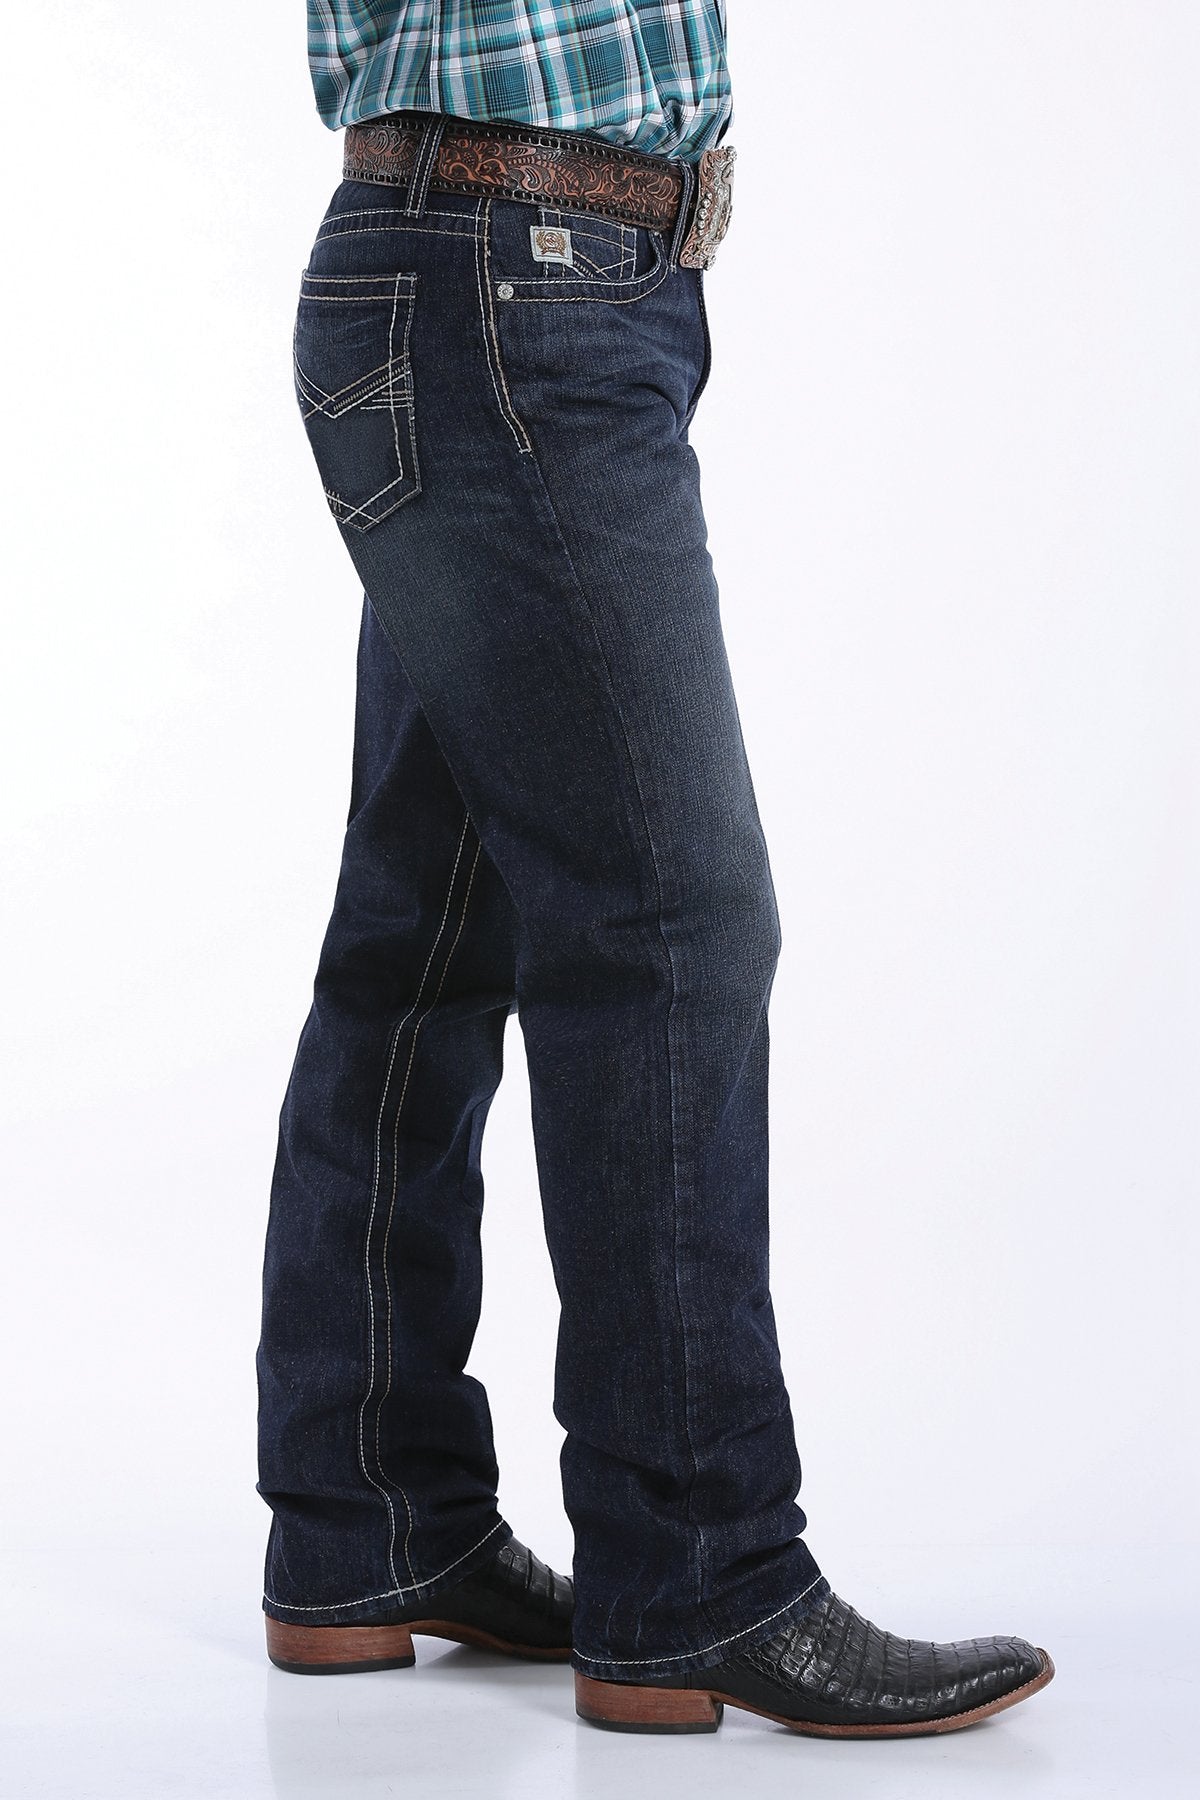 CINCH GRANT RELAXED FIT DARK WASH JEAN